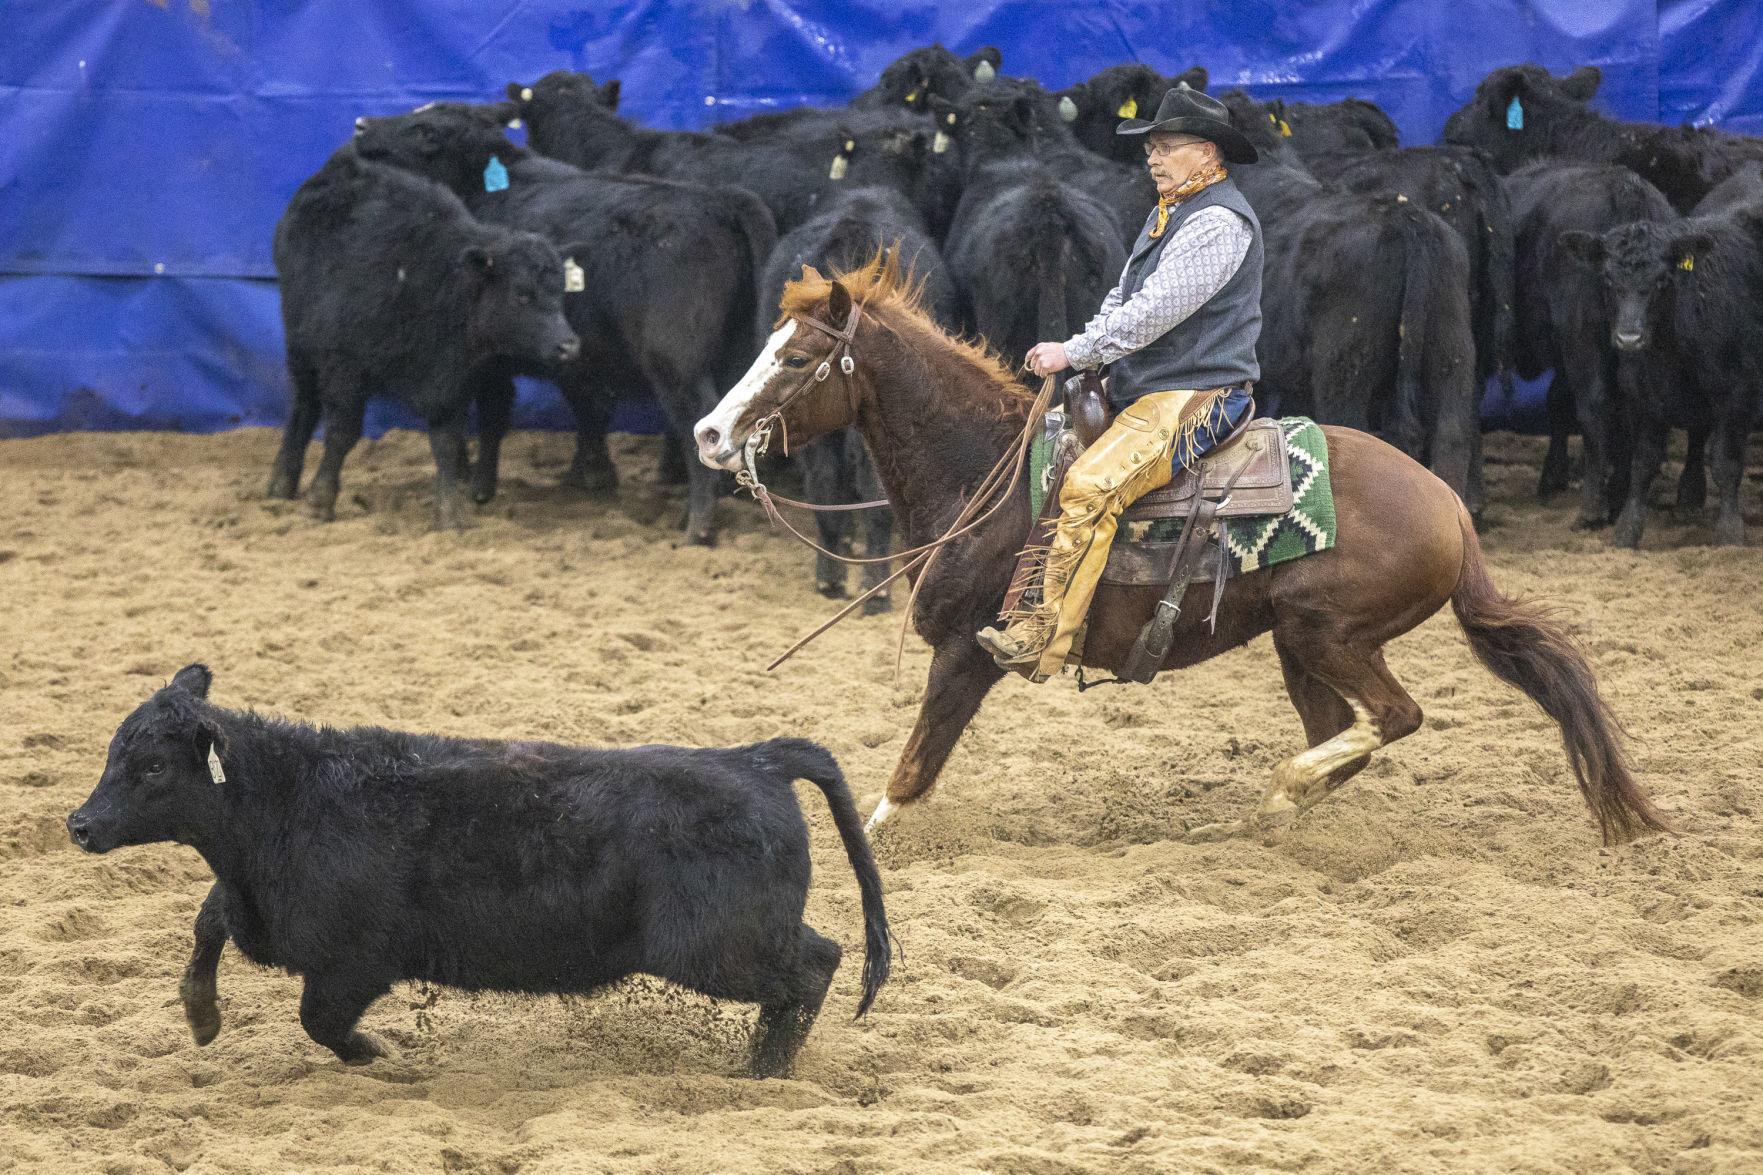 PHOTOS Cutting horse competition comes to Rapid City